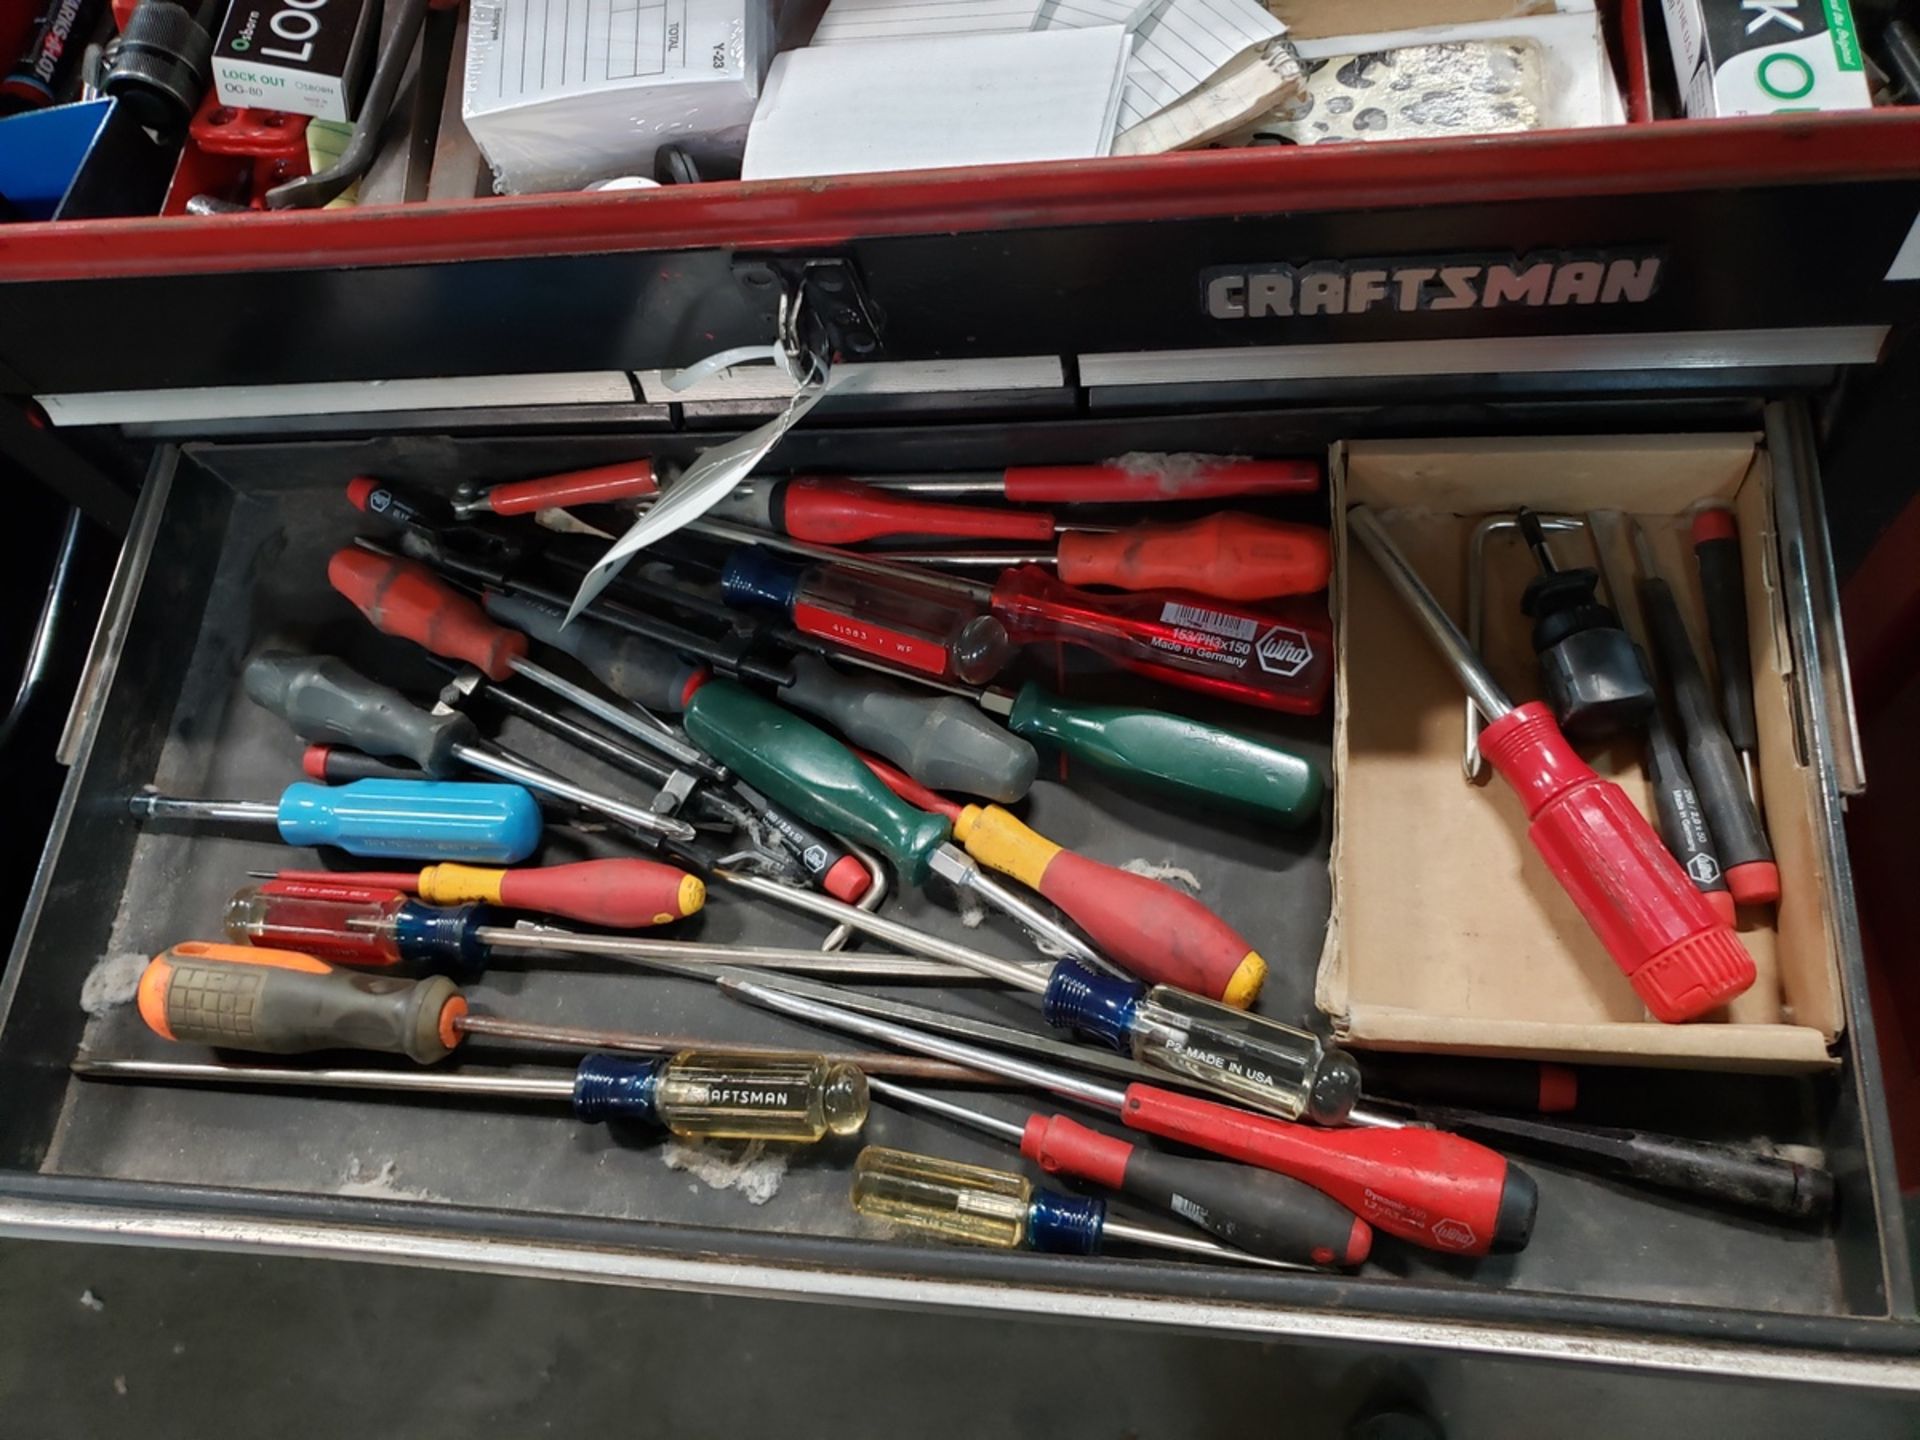 Craftsman Top & Uline Bottom Tool Chests, W/ Contents, (See Additional Pictures) Rig Fee: $25 - Image 3 of 13